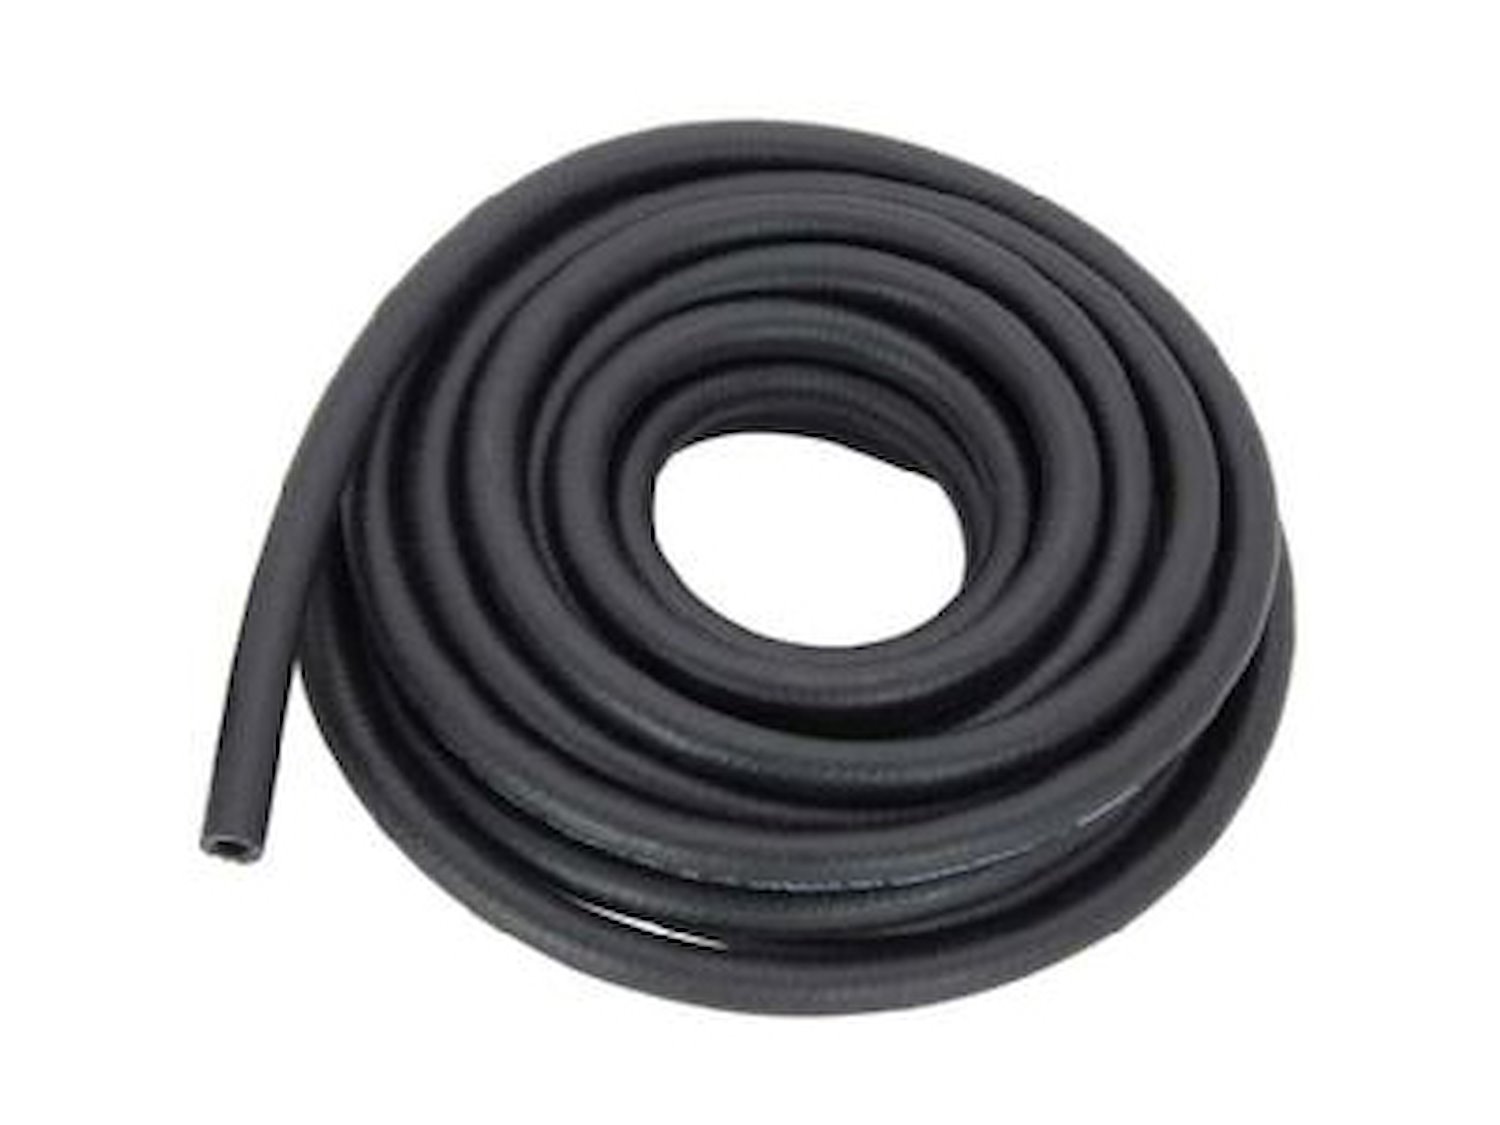 Jegs Performance Products 15995 5 16" Diameter Universal Fuel Hose